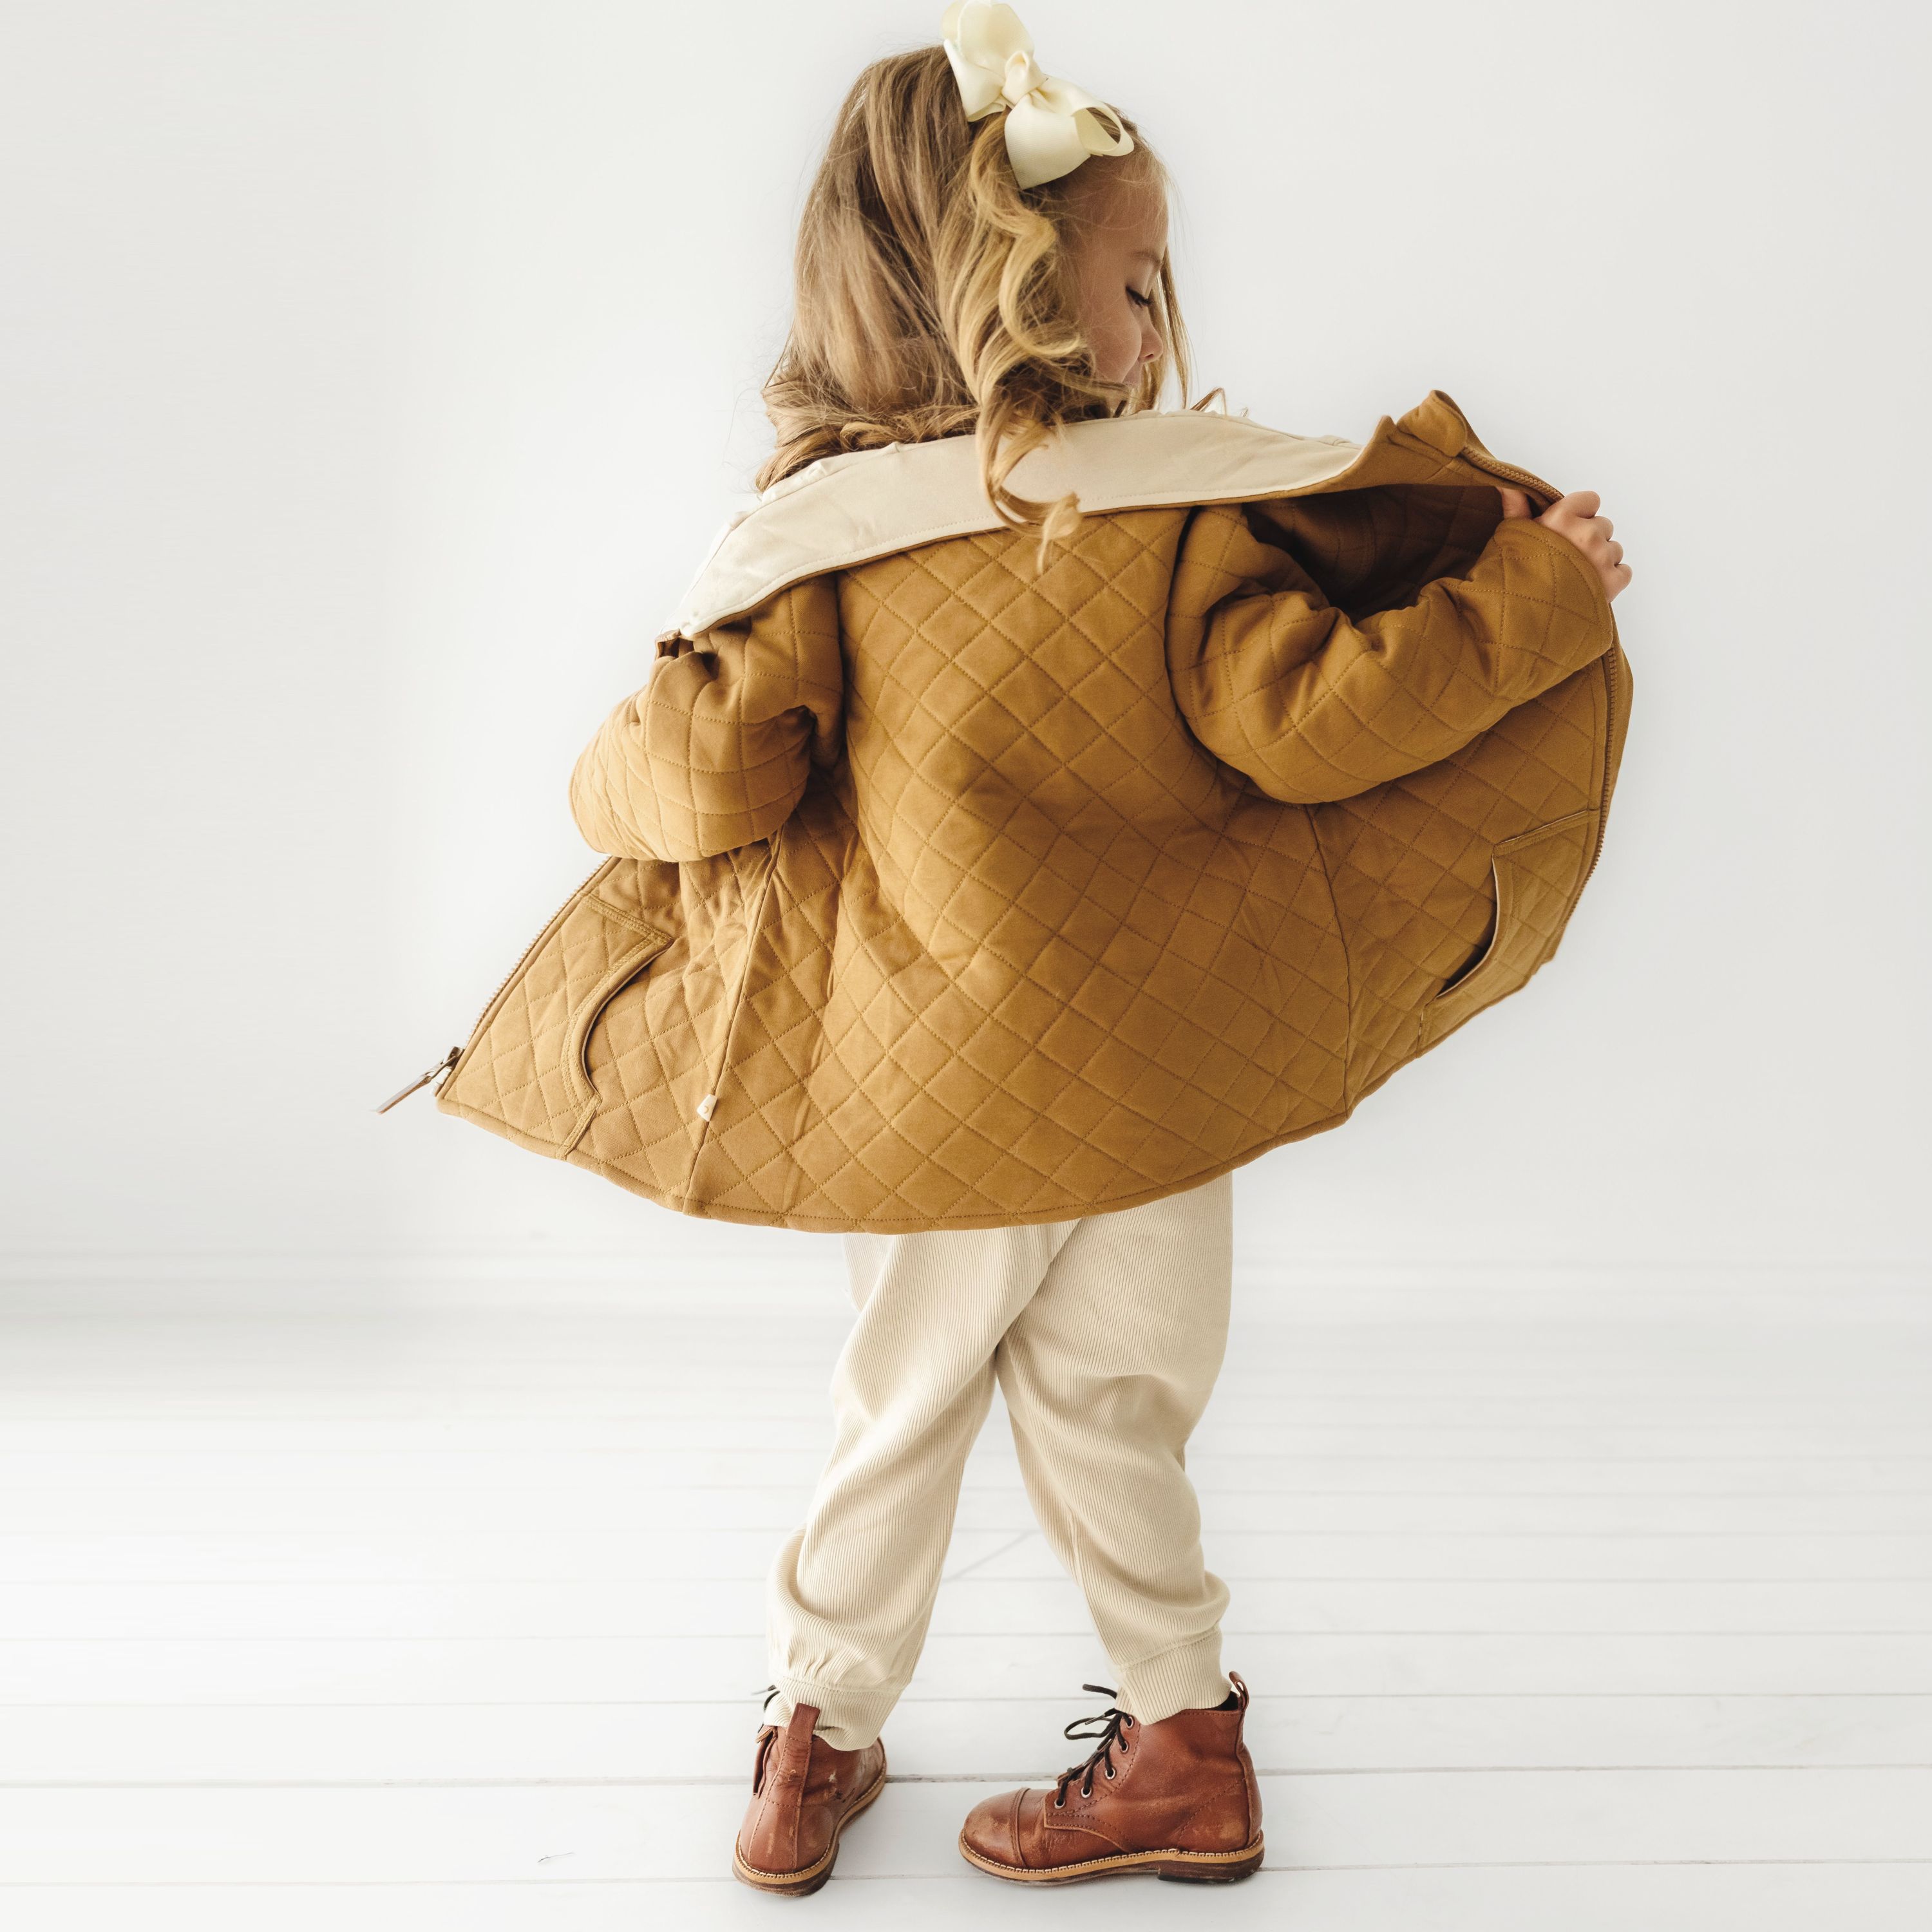 A little girl with a ponytail, wearing a large Organic Kids tan merino wool zip jacket, beige pants, and brown boots, stands with her back to the camera in a white room.